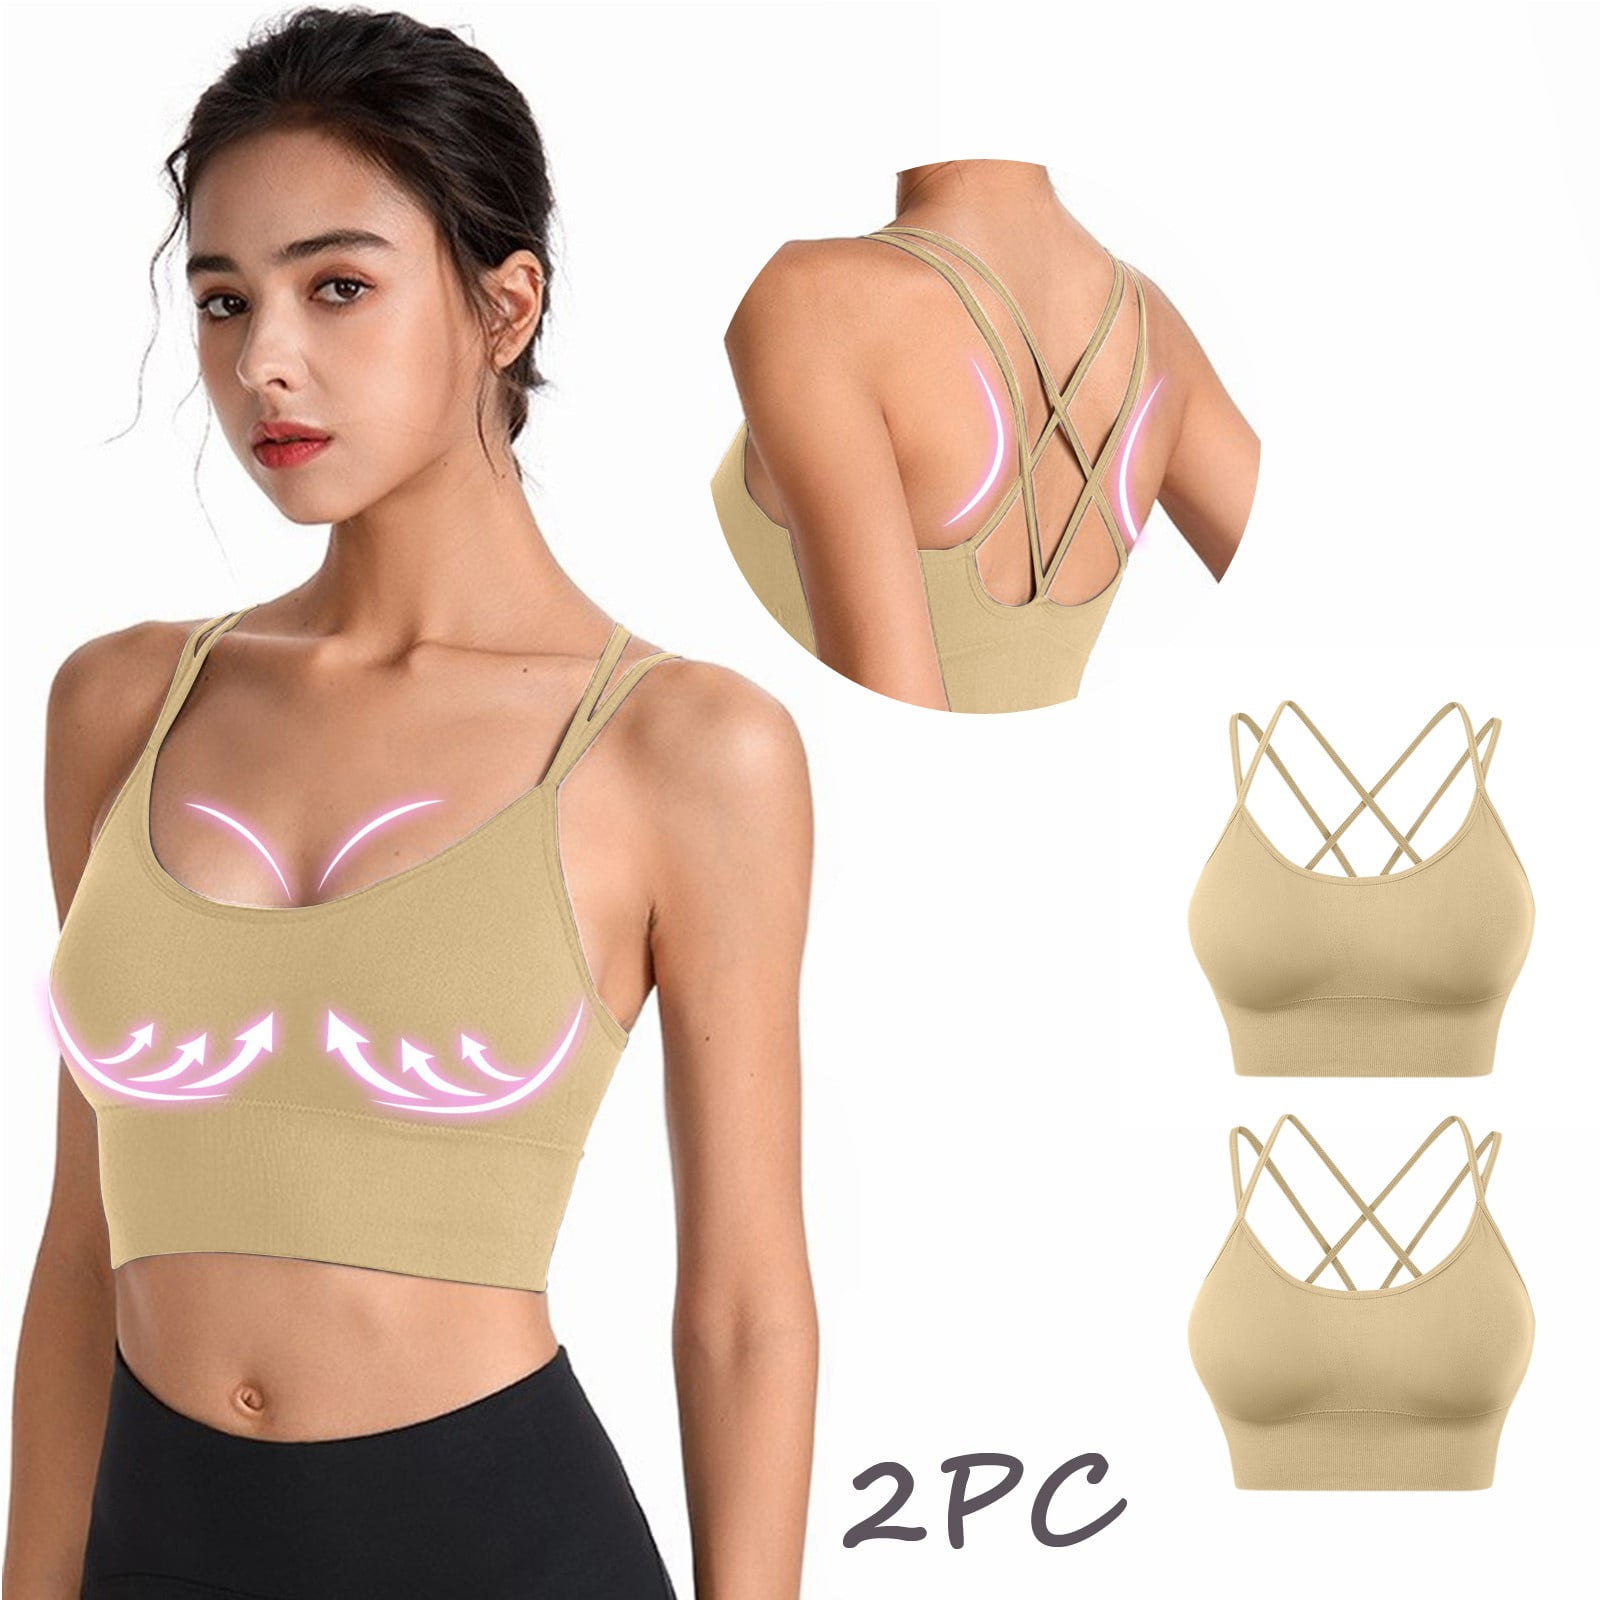 CAICJ98 Sports Bras for Women Sports Bra for Women, Criss-Cross Back Padded Strappy  Sports Bras M Support Yoga Bra with Removable Black,L 